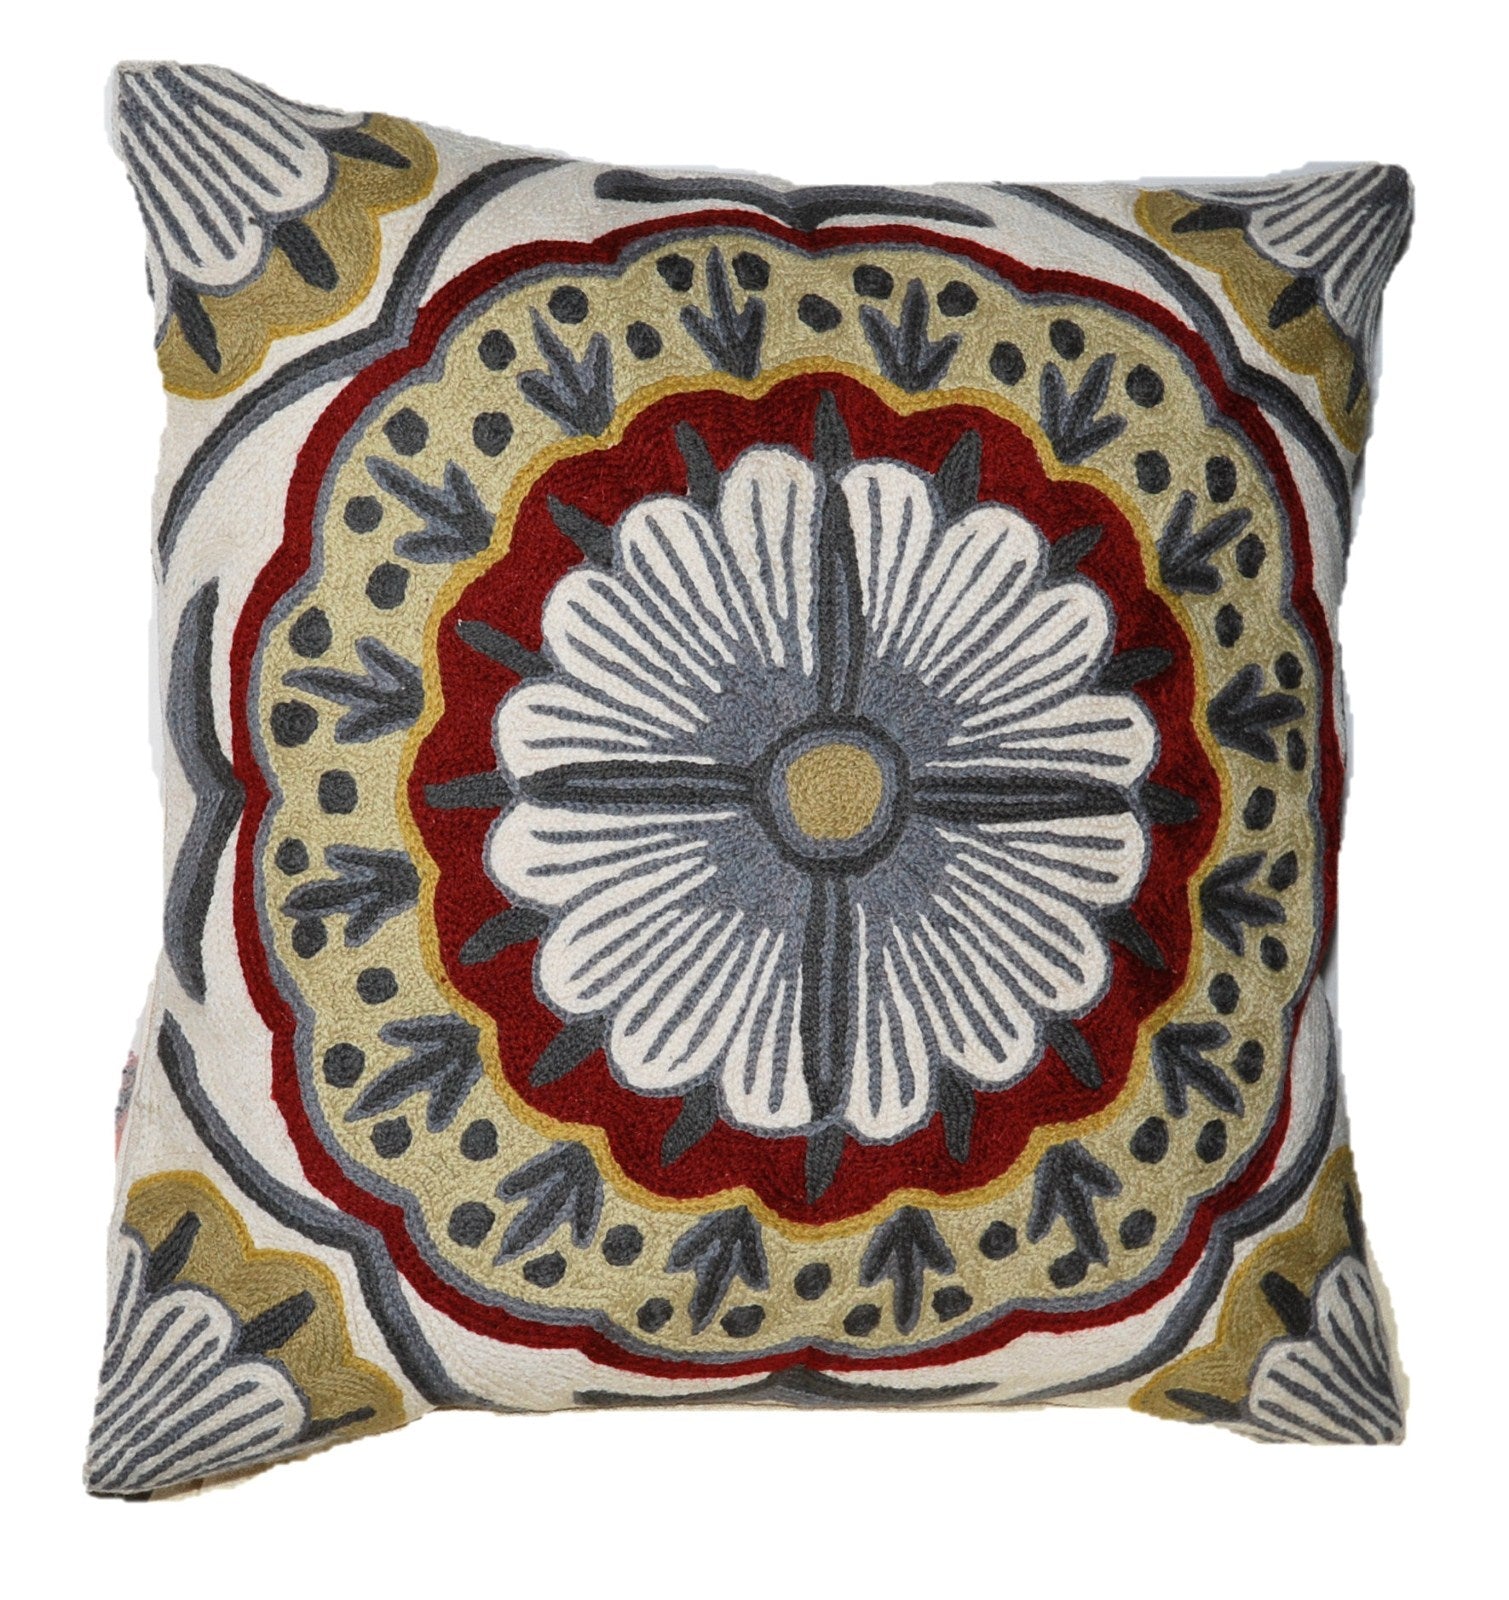 Crewel Wool Embroidered Cushion Throw Pillow Cover, Multicolor #CW1007